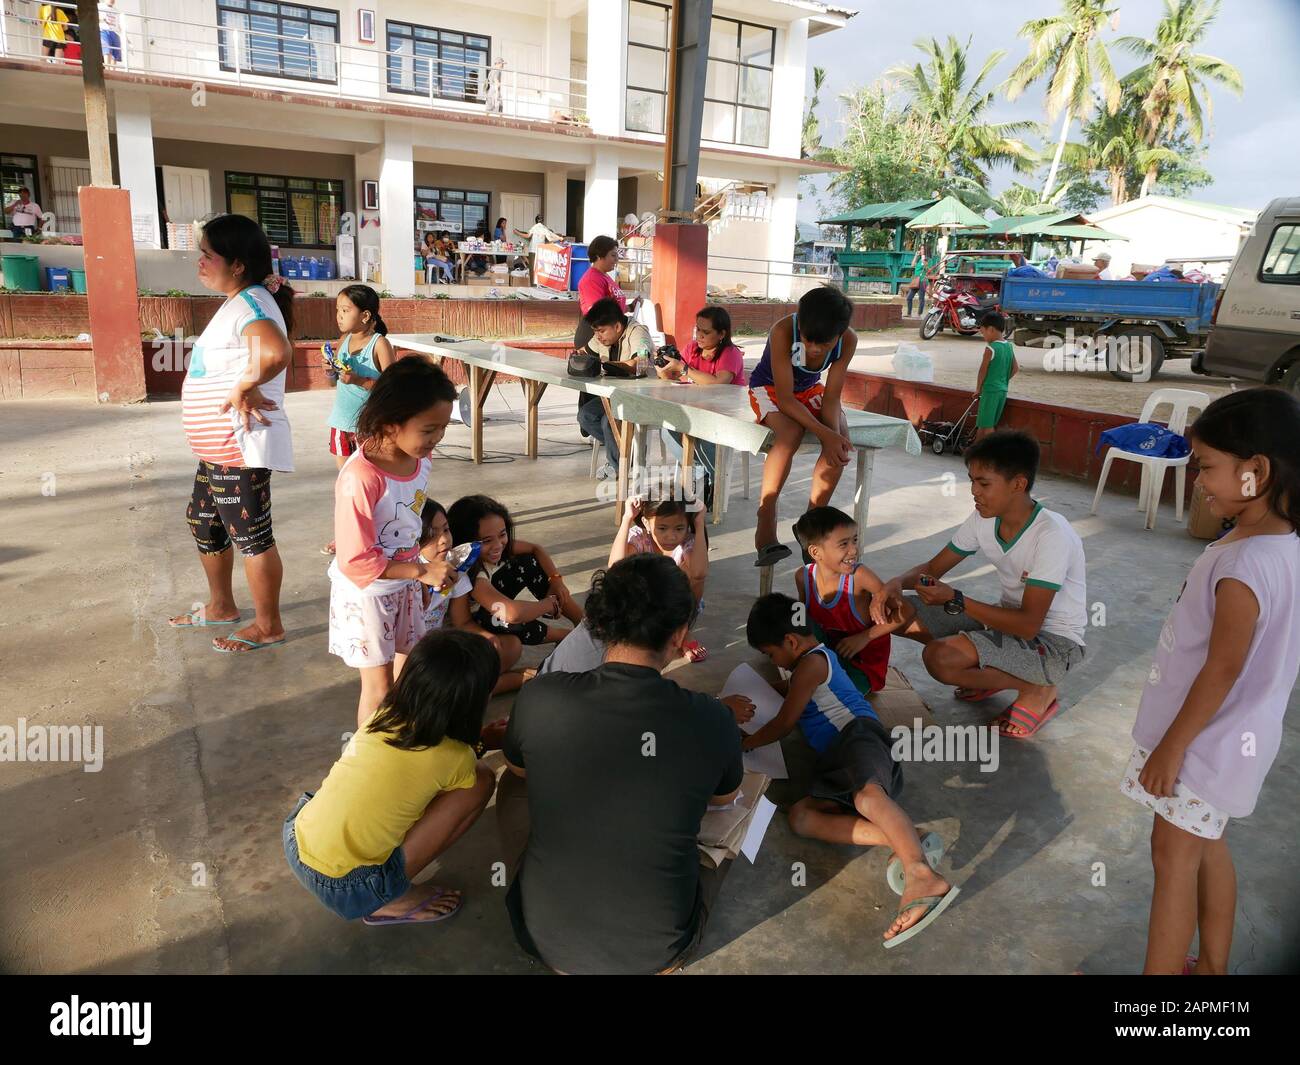 Dapilit Evacuation Center, Alitagtag, Batangas. Evacuated children from the lockdown town of San Nicholas, Batangas underwent a Trauma Informed Resiliency Workshop conducted by Salinlahi Children's Rehabilitation Center, through an Art Workshop, aims to help children from the heavily affected areas from the context of the recent volcanic eruption, cope and recover from the event and be resilient enough to overcome adversity and continue the children's normal development. Workshop had a small group engaging communal conversation, discussing information about volcanos, how it affects the people, Stock Photo